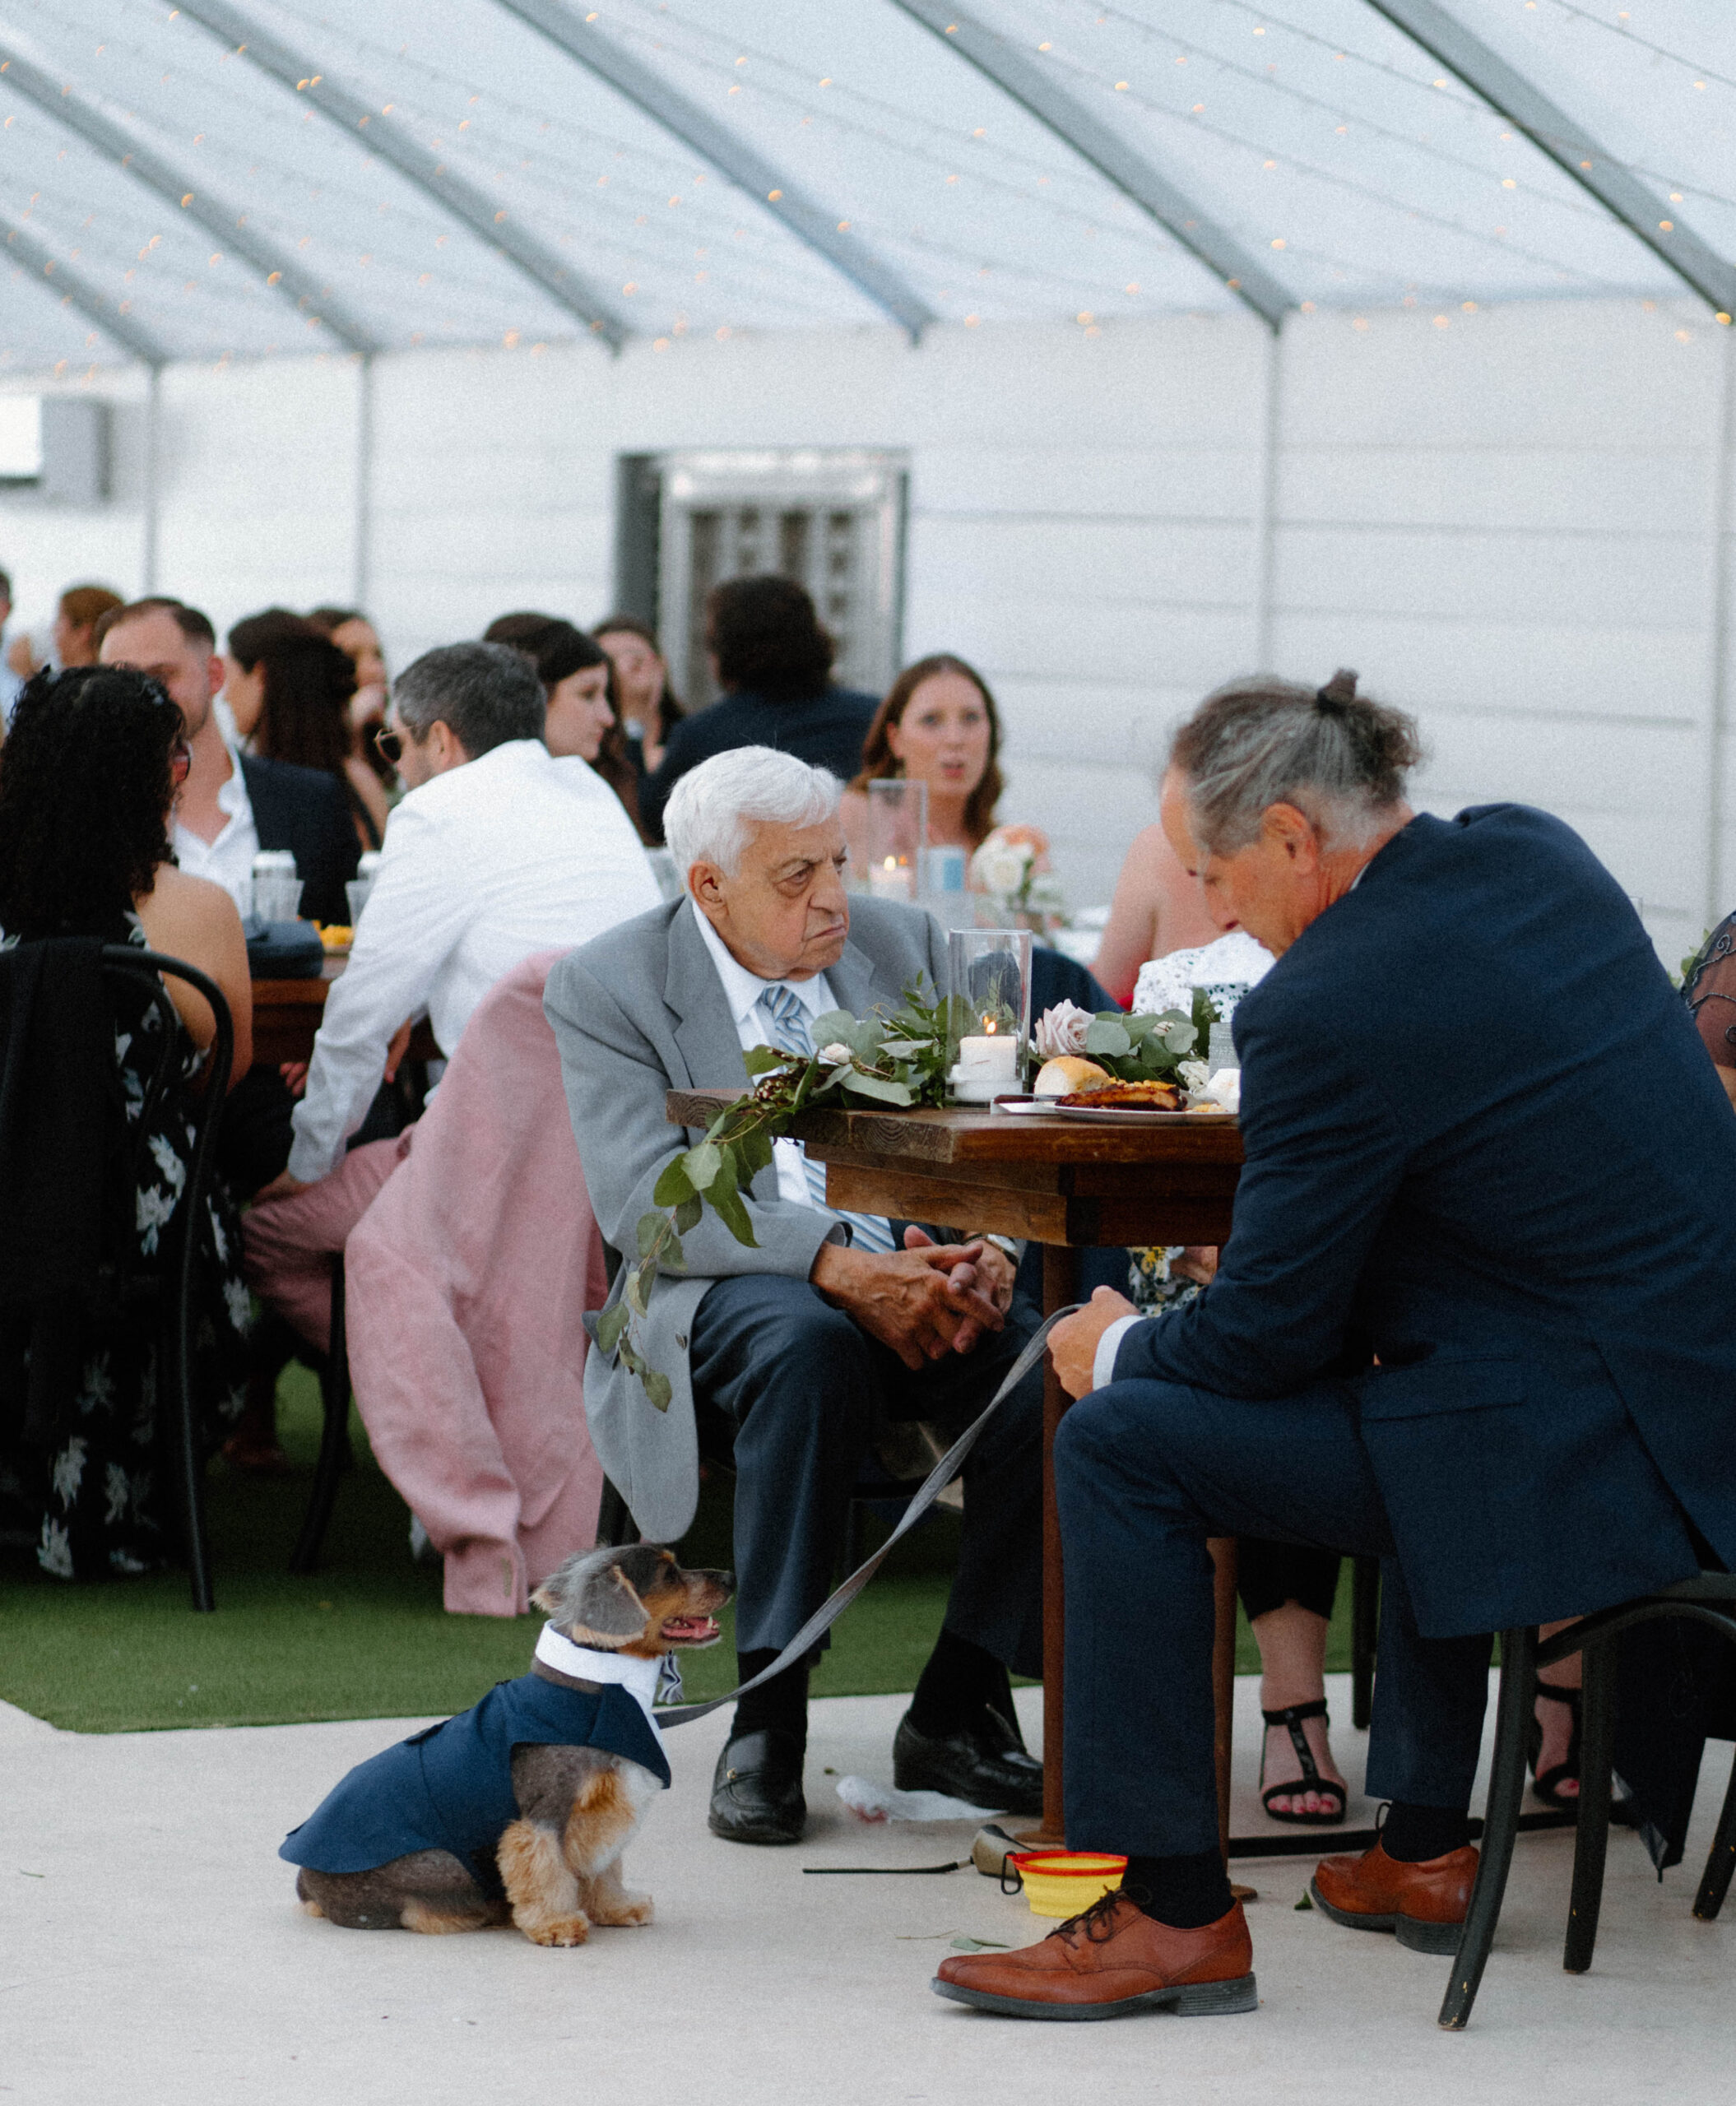 Guests dining at a wedding reception with their dog. 